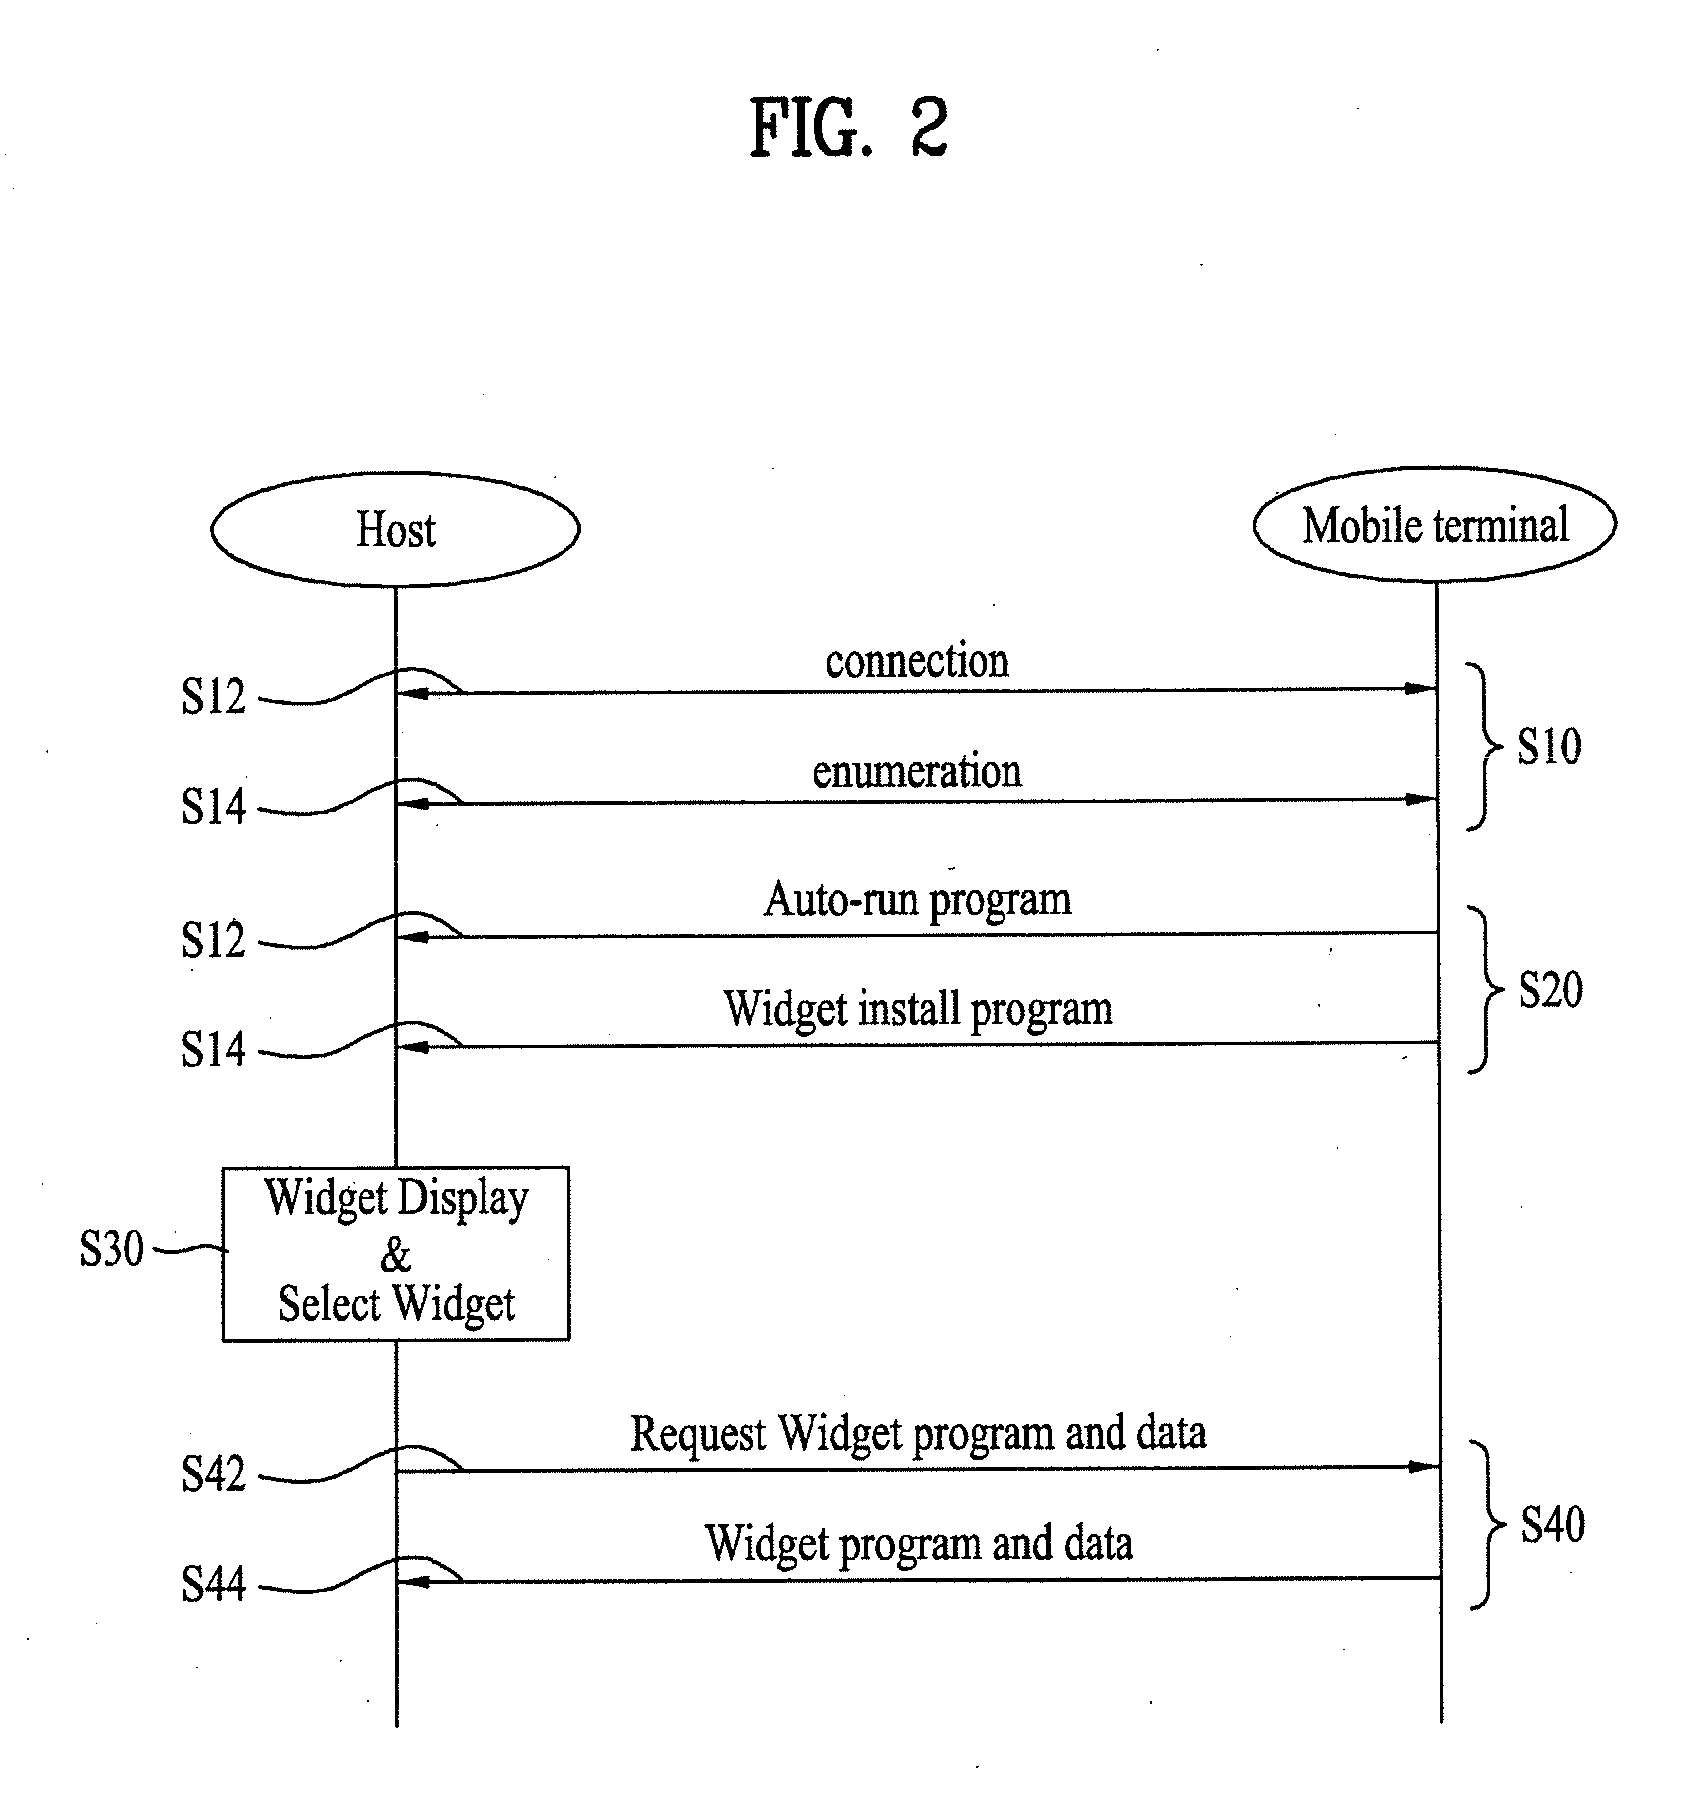 Communication device and a host device, a method of processing signal in the communication device and the host device, and a system having the communication device and the host device